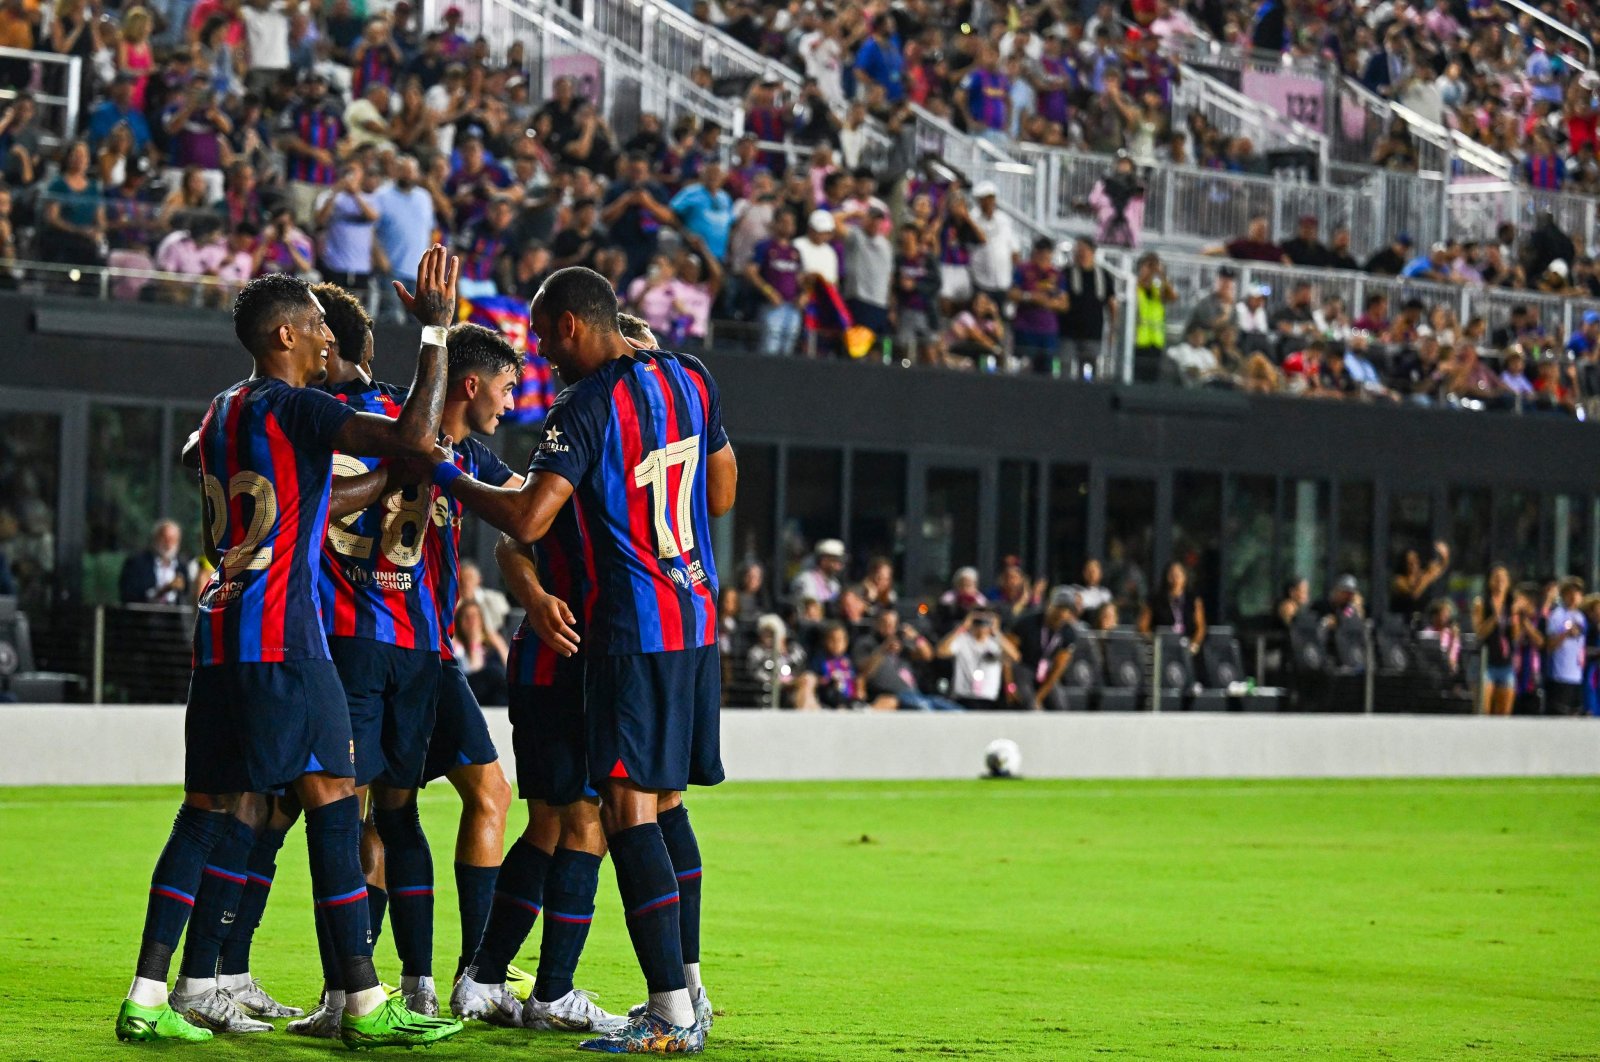 Barcelona players celebrate a goal against Inter Miami, Fort Lauderdale, U.S., July 19, 2022. (AFP Photo)